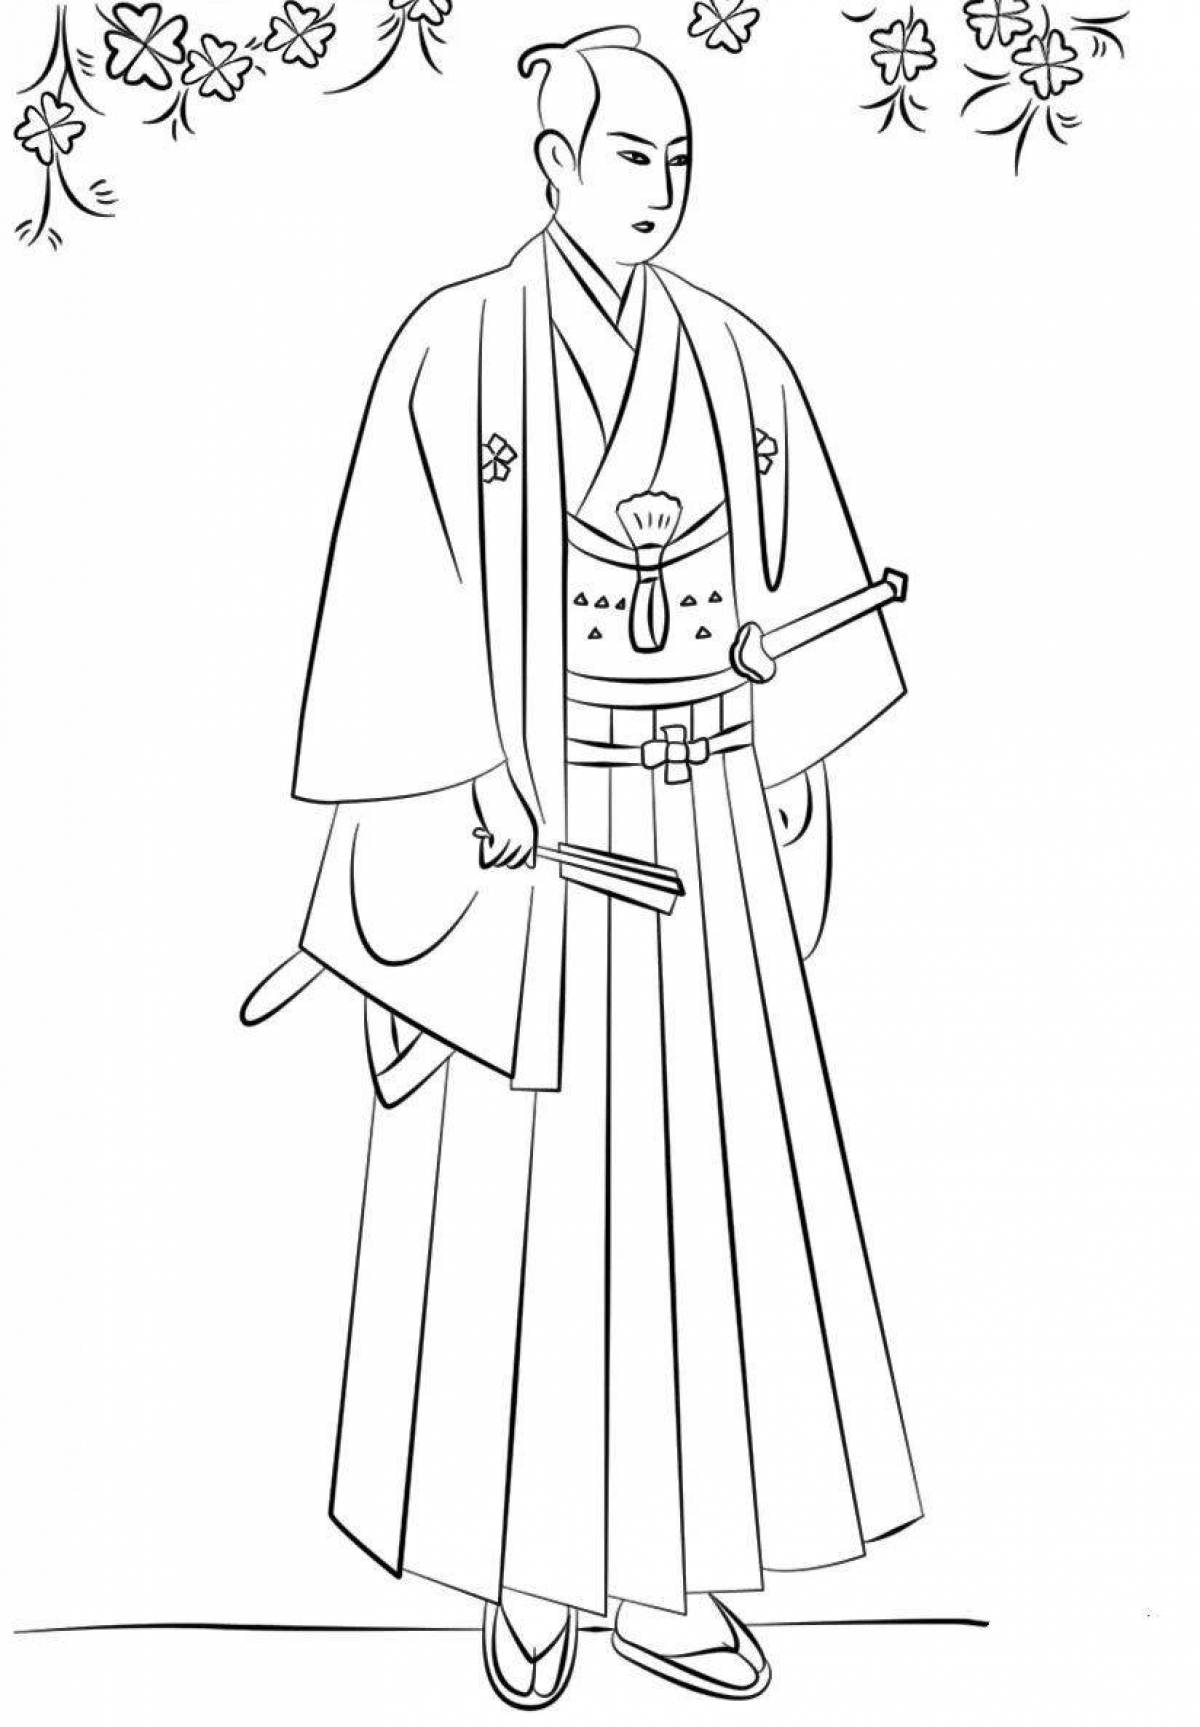 Coloring book shining Chinese costume